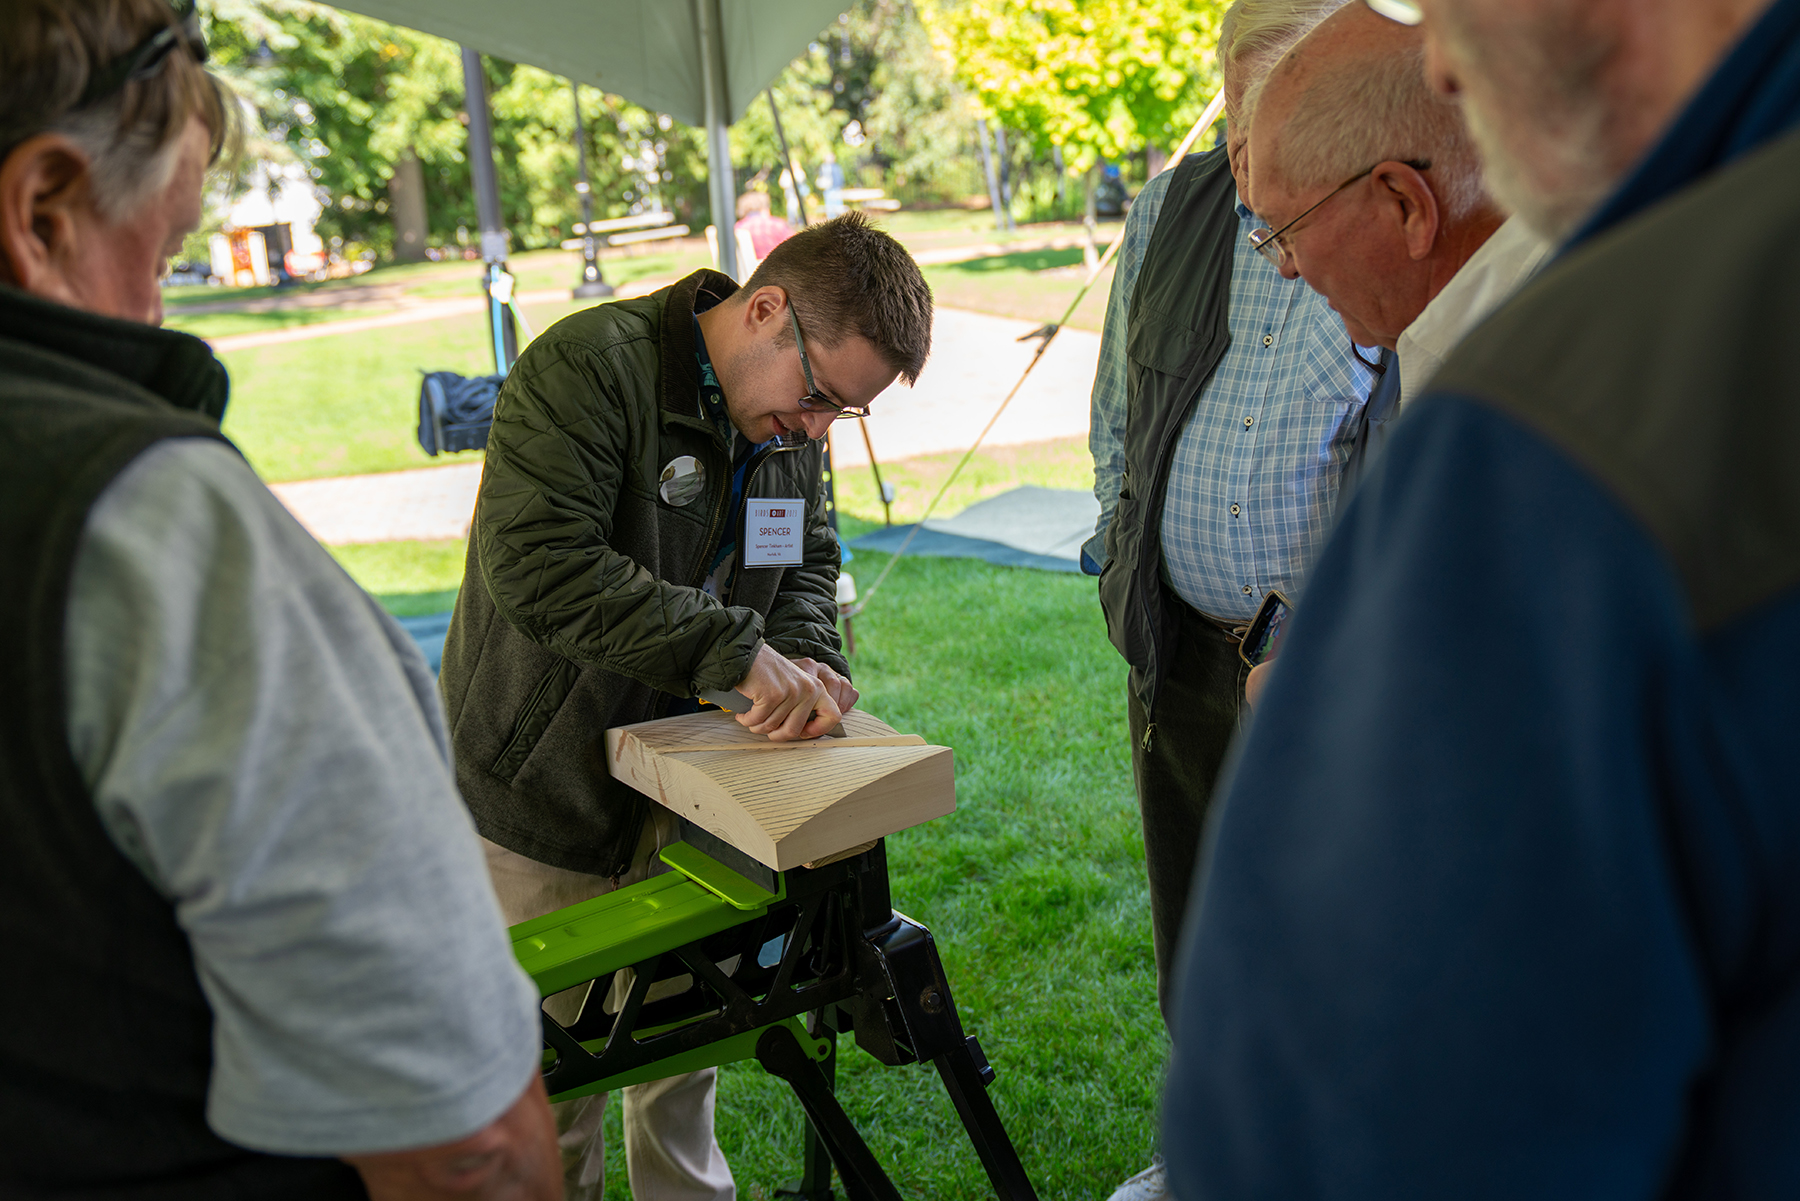 Spencer Tinkham shows off his carving skills during a Members Preview Artist in Action